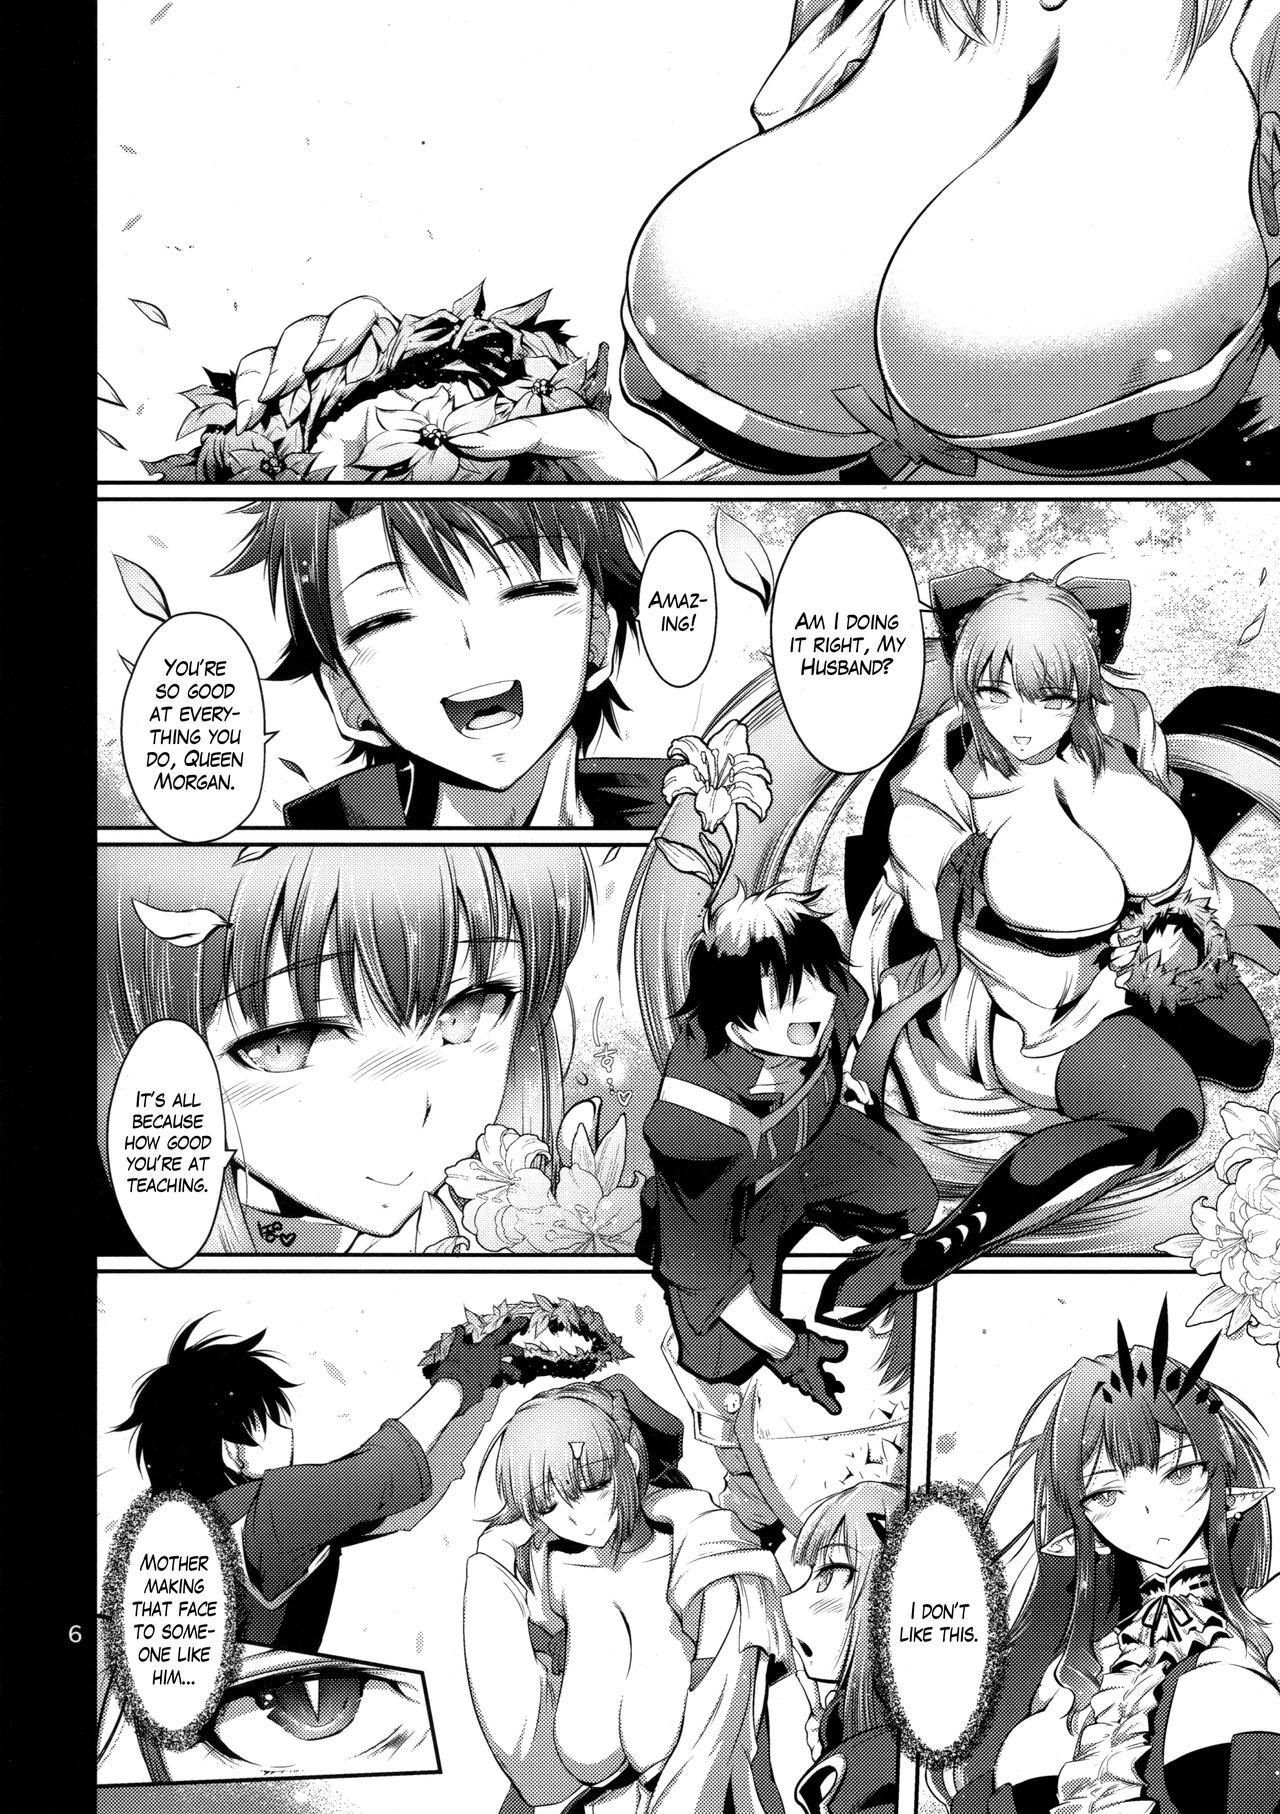 Leaked Taikan Joou | The Crowned Queen of Adultery - Fate grand order Oiled - Page 5